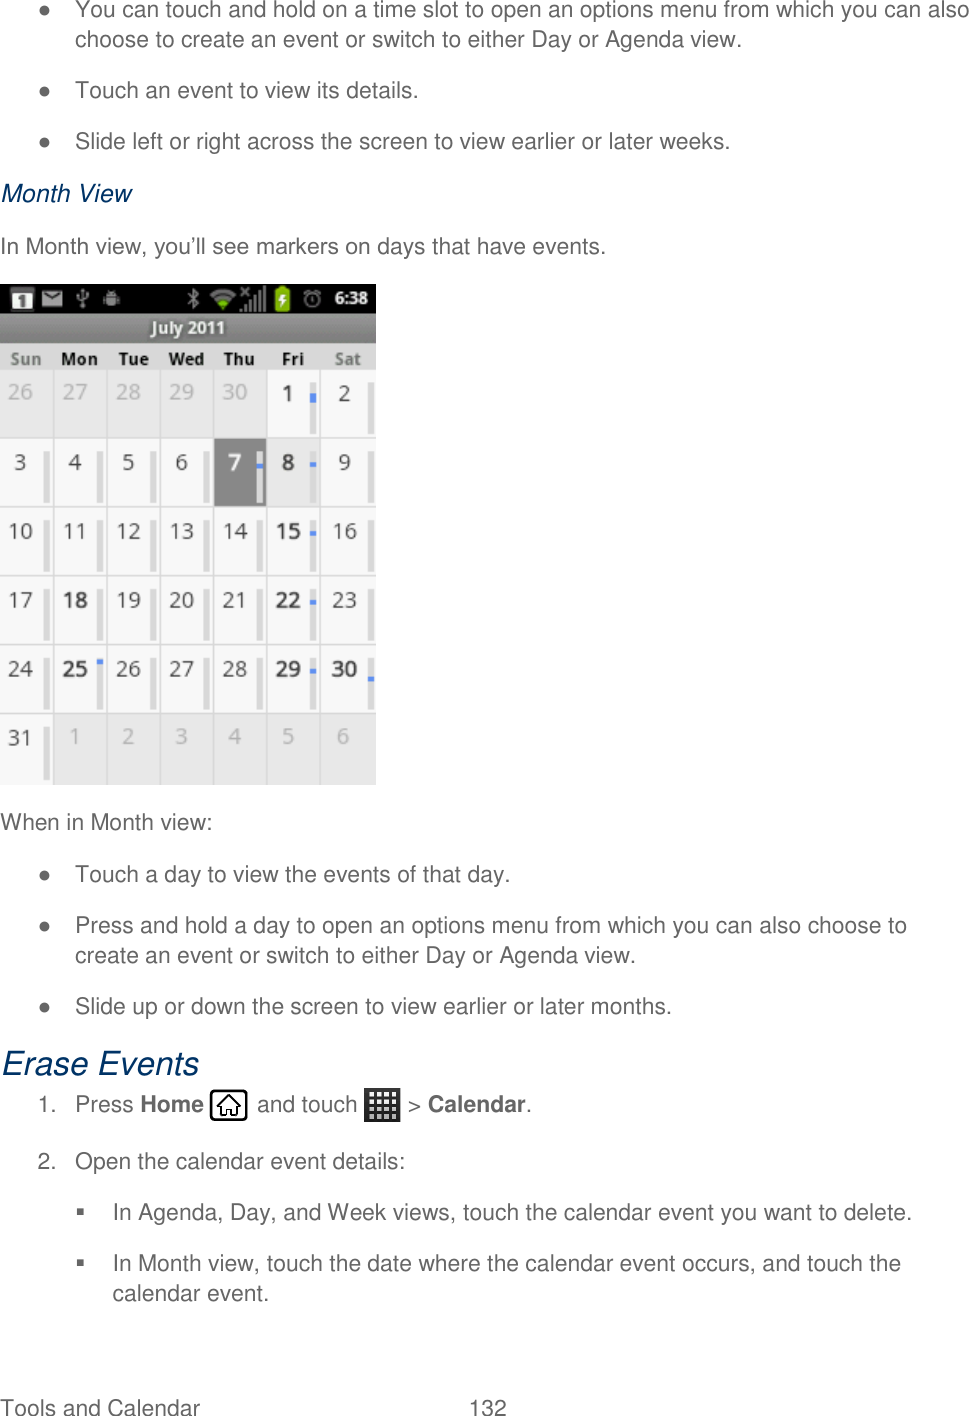 Tools and Calendar  132   ●  You can touch and hold on a time slot to open an options menu from which you can also choose to create an event or switch to either Day or Agenda view. ●  Touch an event to view its details. ●  Slide left or right across the screen to view earlier or later weeks. Month View In Month view, you’ll see markers on days that have events.  When in Month view: ●  Touch a day to view the events of that day. ●  Press and hold a day to open an options menu from which you can also choose to create an event or switch to either Day or Agenda view. ●  Slide up or down the screen to view earlier or later months. Erase Events 1.  Press Home   and touch   &gt; Calendar. 2.  Open the calendar event details:   In Agenda, Day, and Week views, touch the calendar event you want to delete.   In Month view, touch the date where the calendar event occurs, and touch the calendar event. 